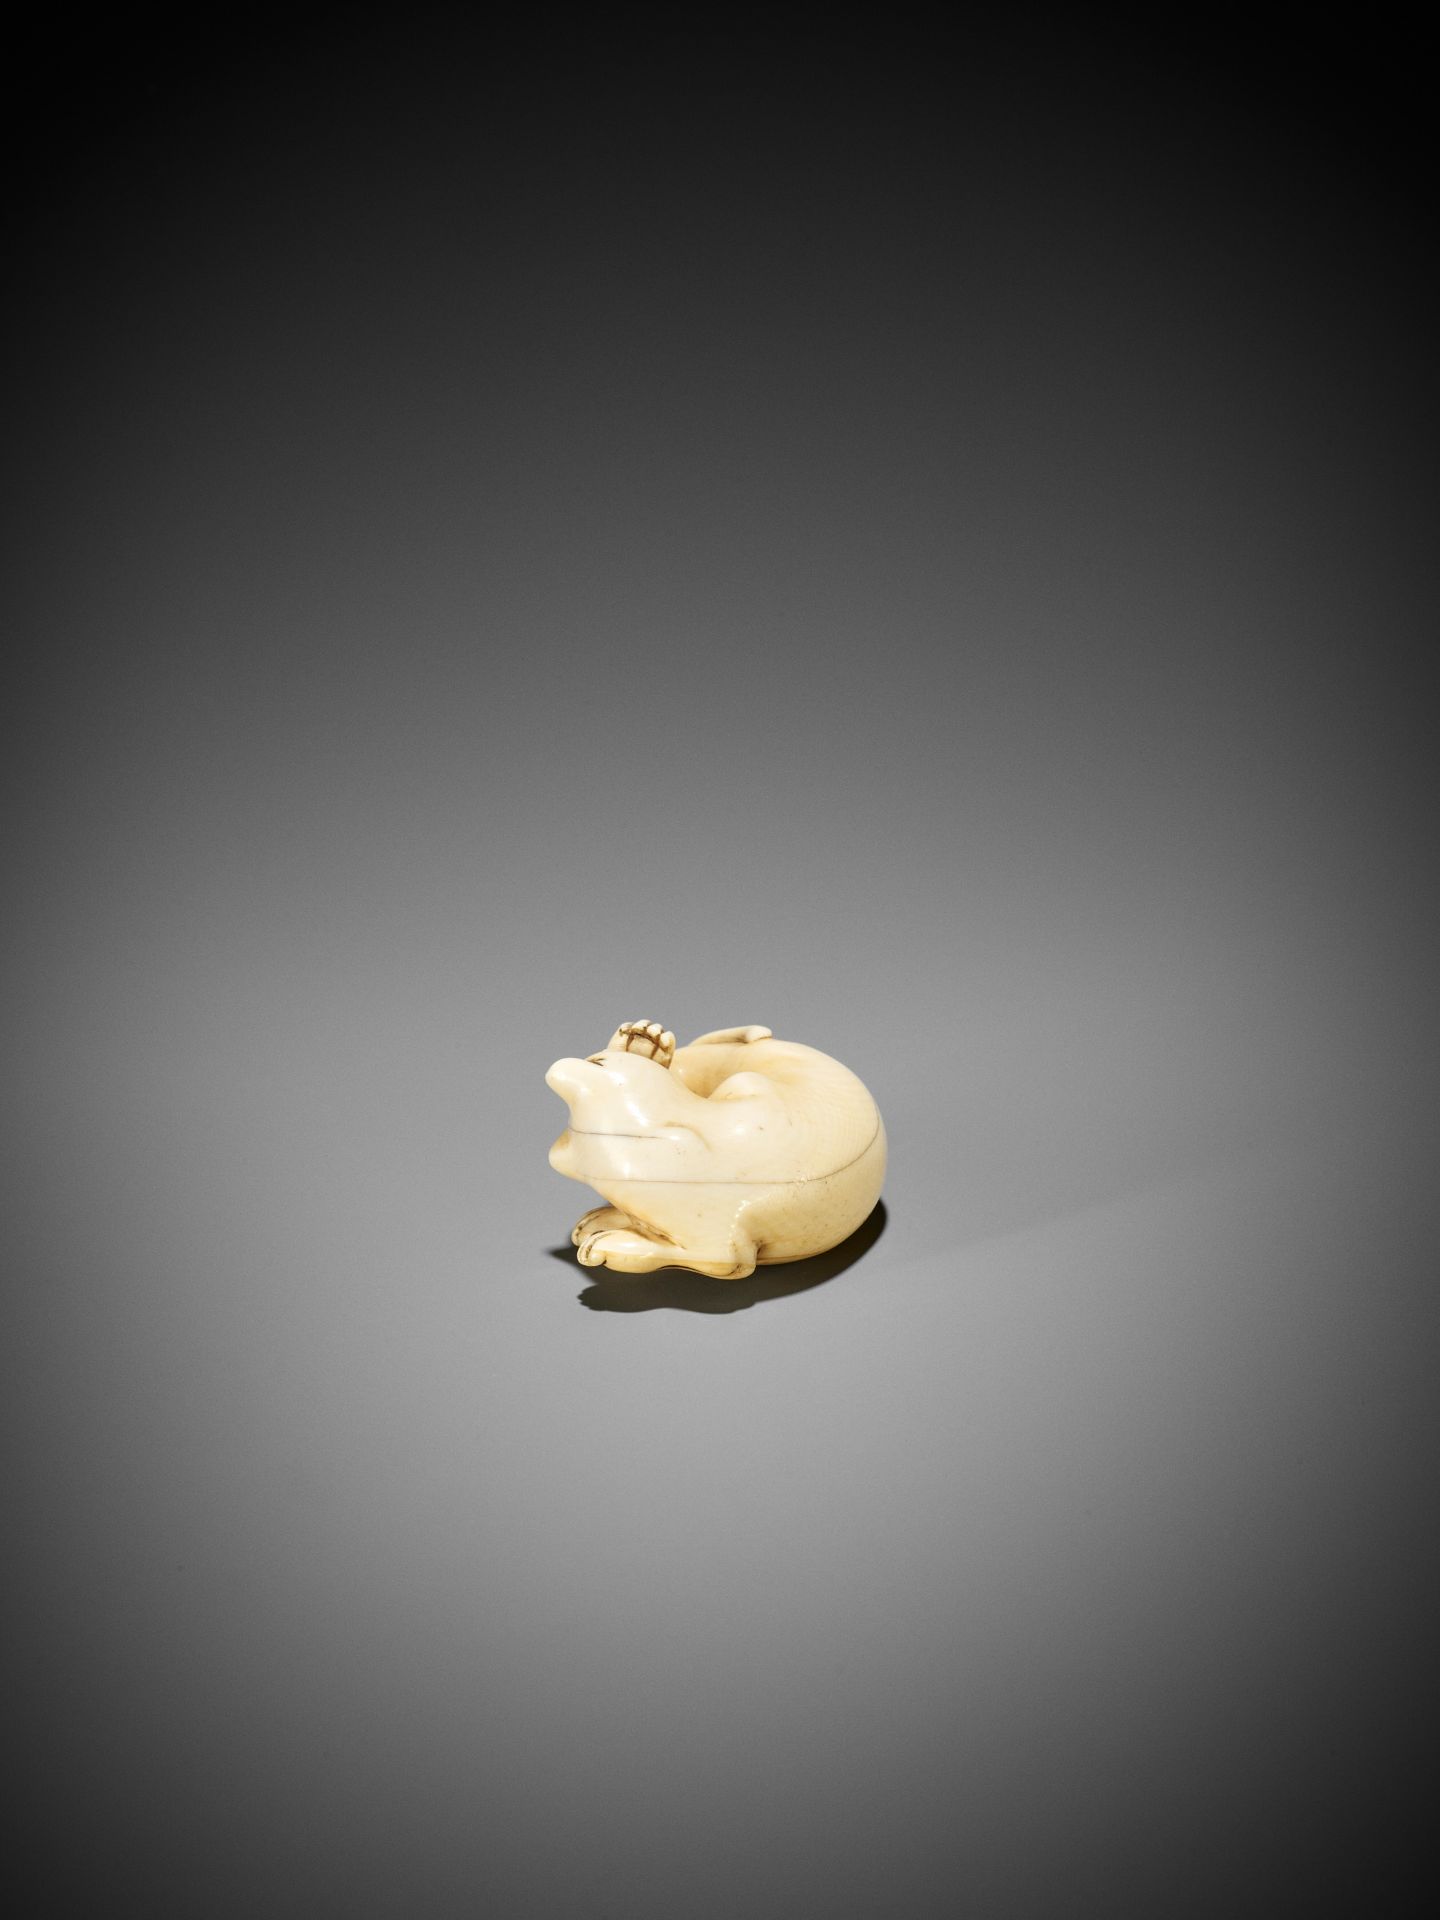 AN IVORY NETSUKE OF A CAT GROOMING ITSELF - Image 6 of 9